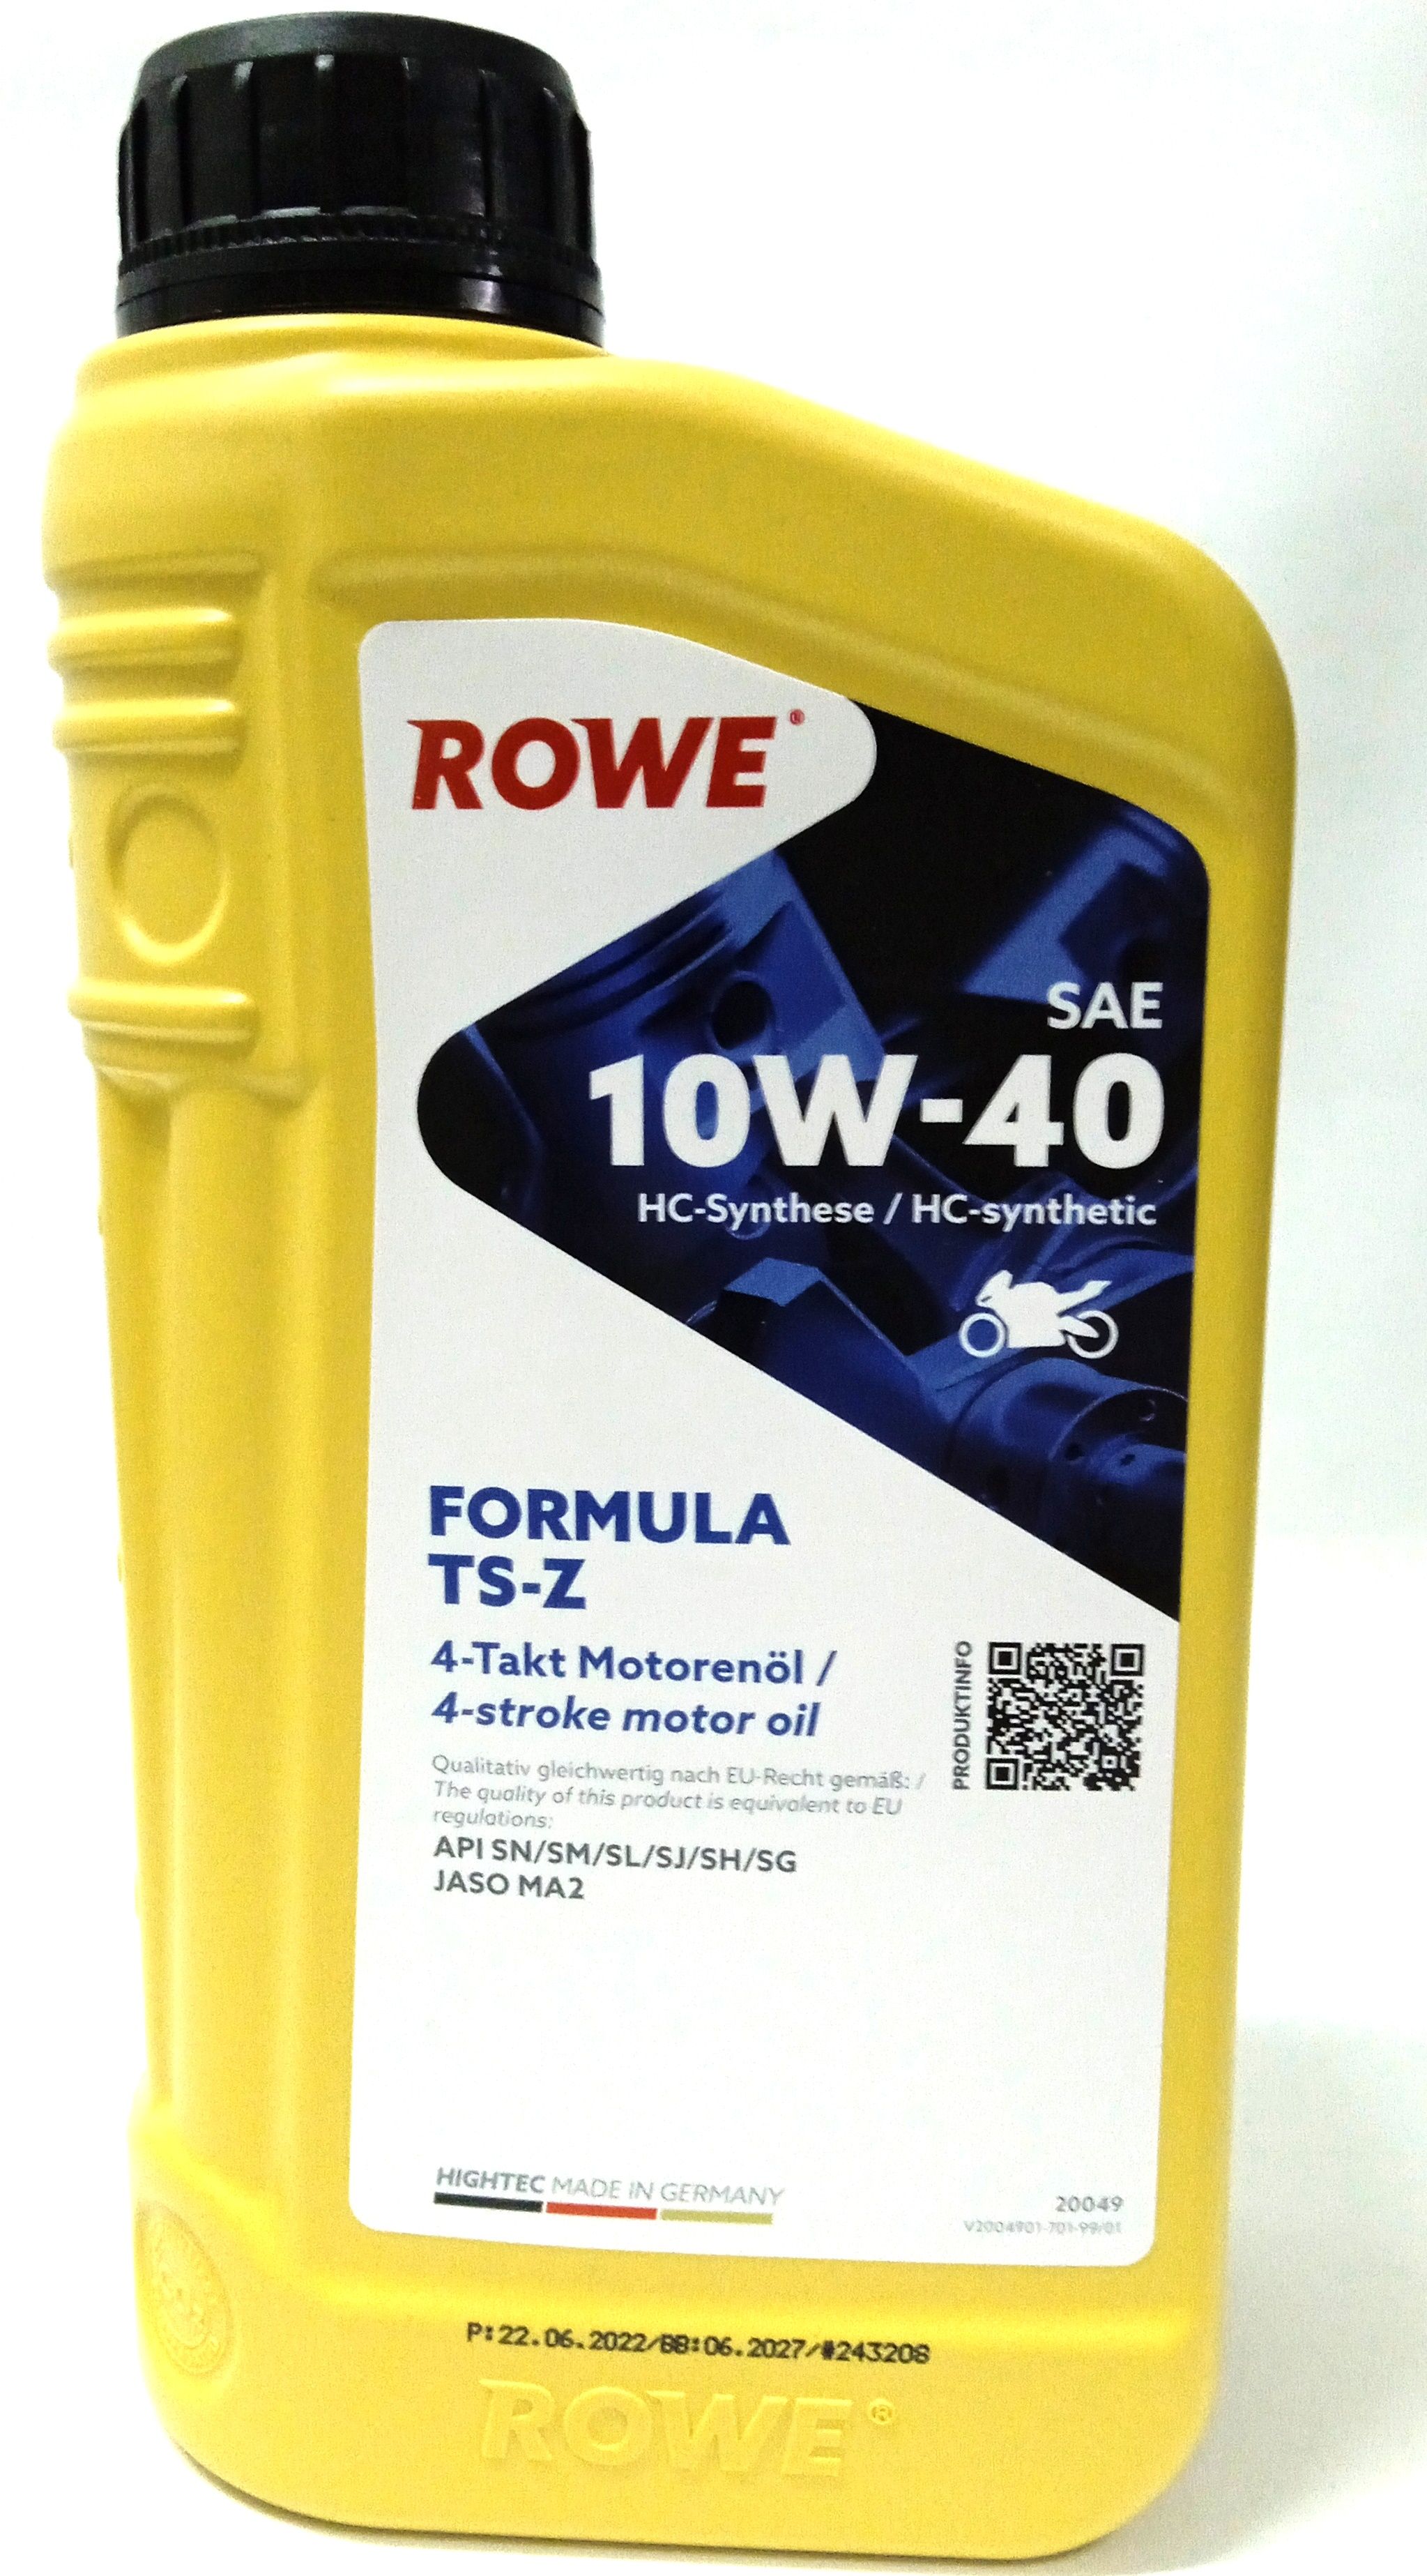 Rove масло. Моторное масло Rowe 10w 40. Rowe Formula GTS HC 10w-40. Масло Rowe 10w 40 Рено Сандеро. Масло Rowe 10w 40 дизель.